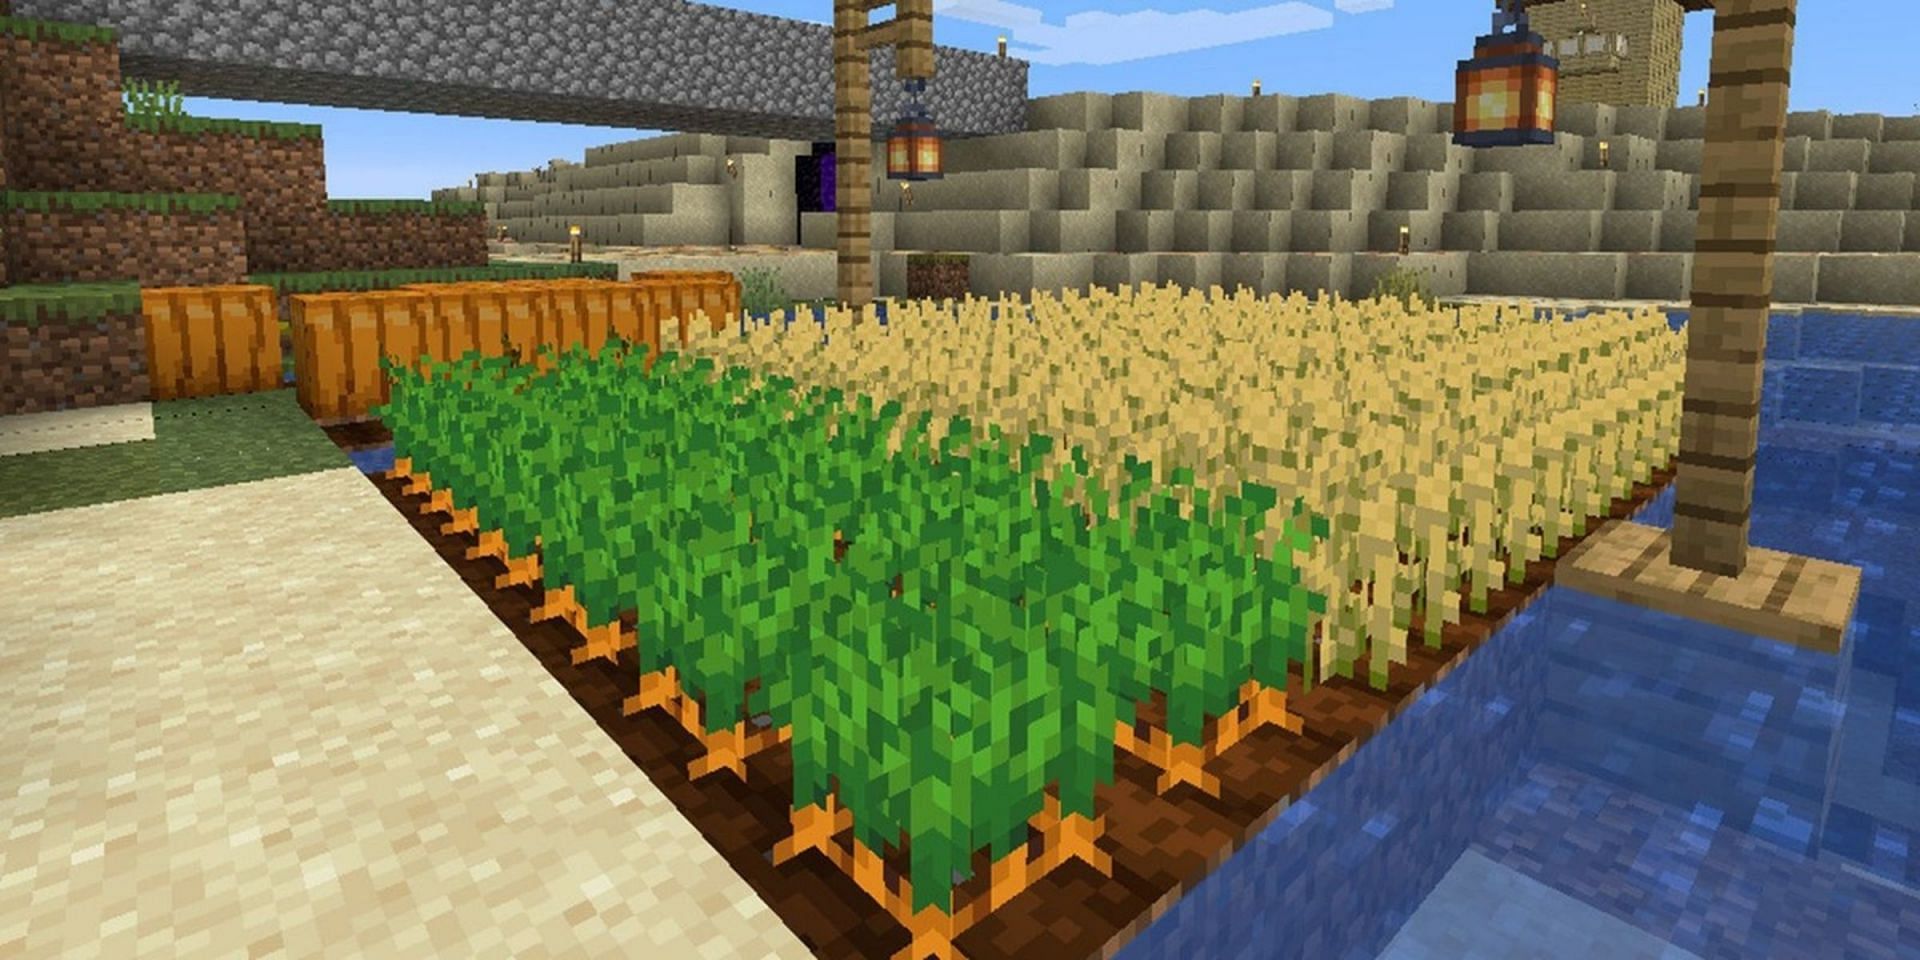 Crop farming can take many forms in Minecraft (Image via Mojang) 